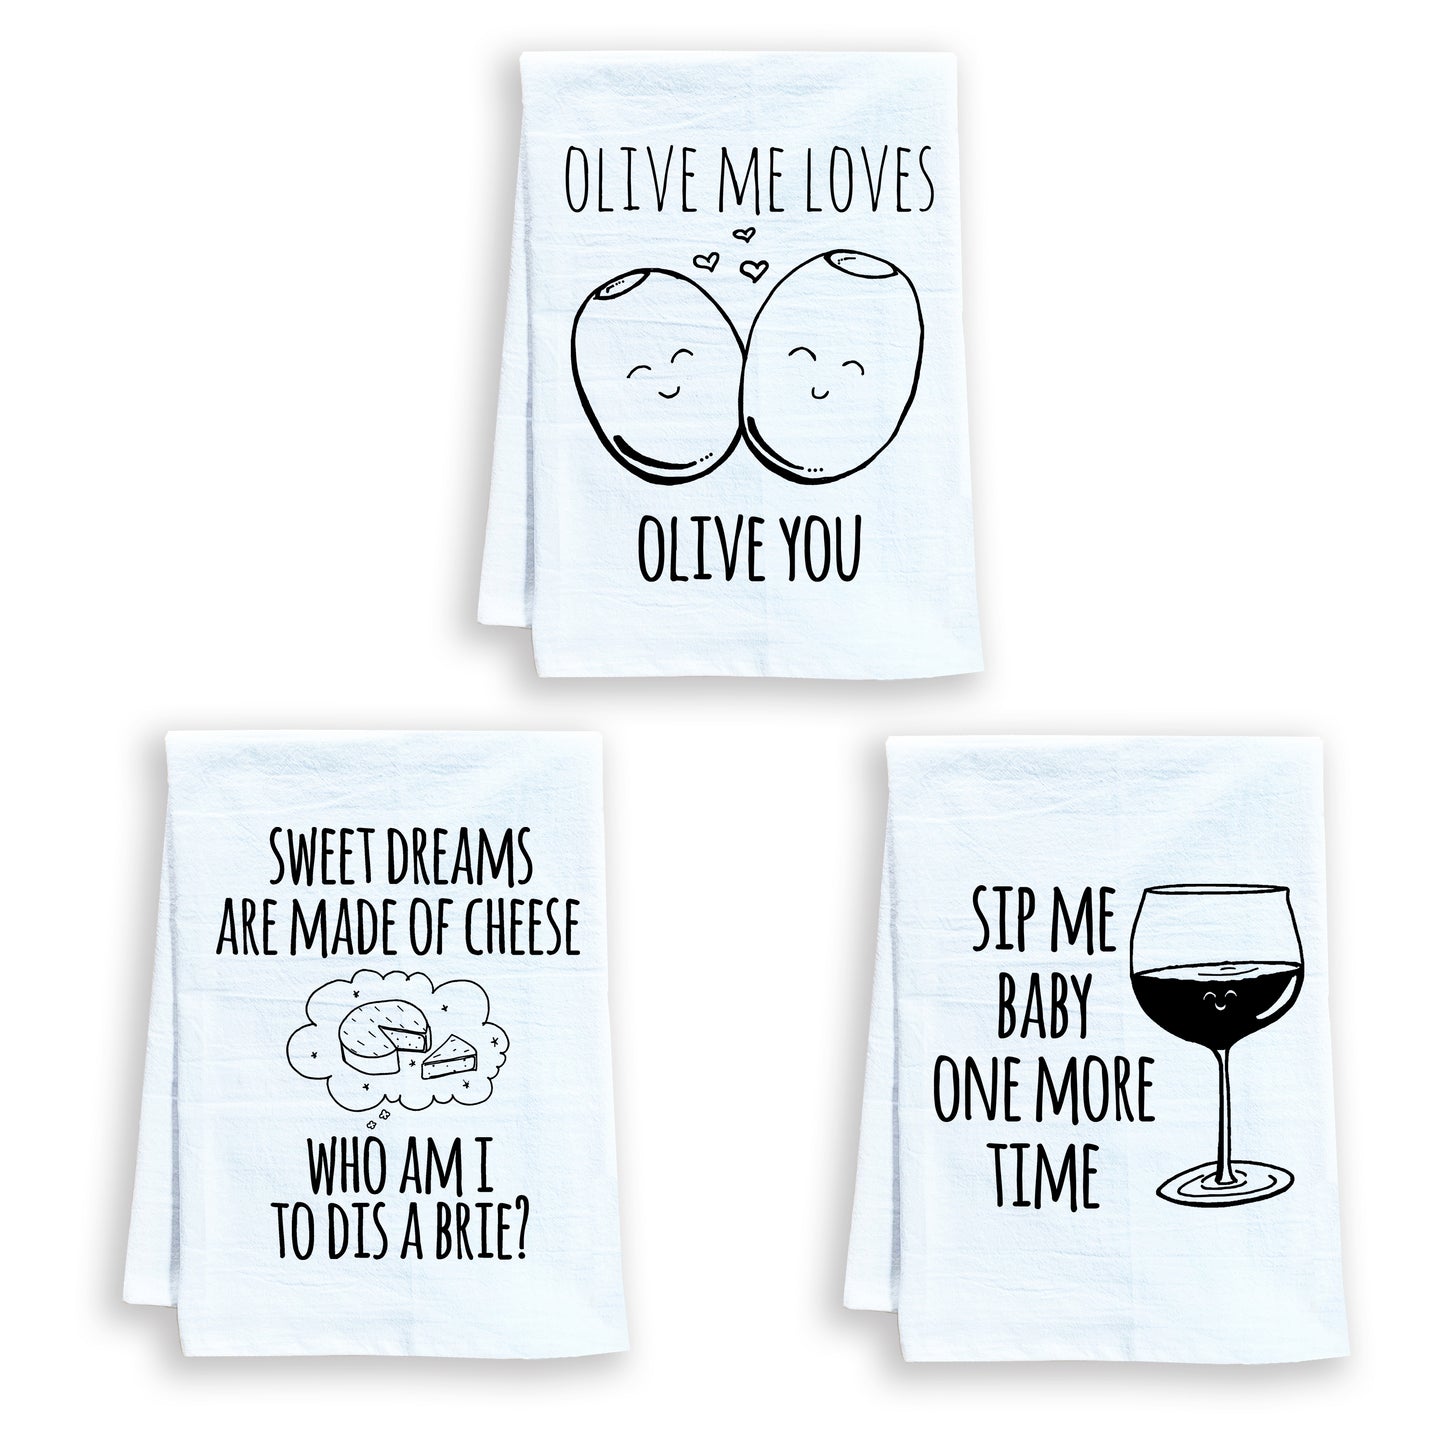 three tea towels with funny sayings on them